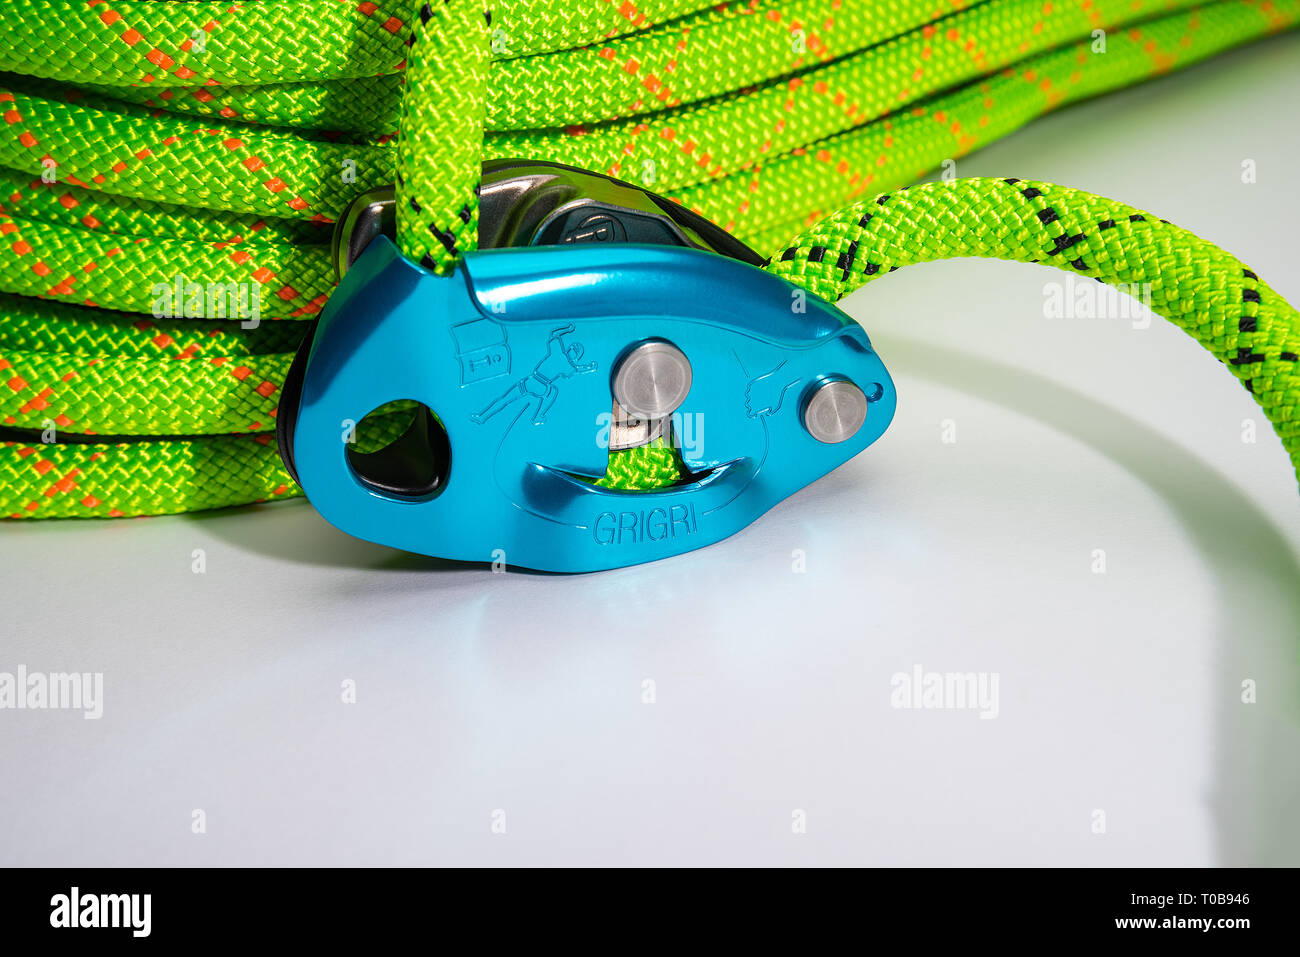 A professional, studio photo of a Petzl GriGri with a green Sterling rope fed through the ATC system on a white background. Stock Photo